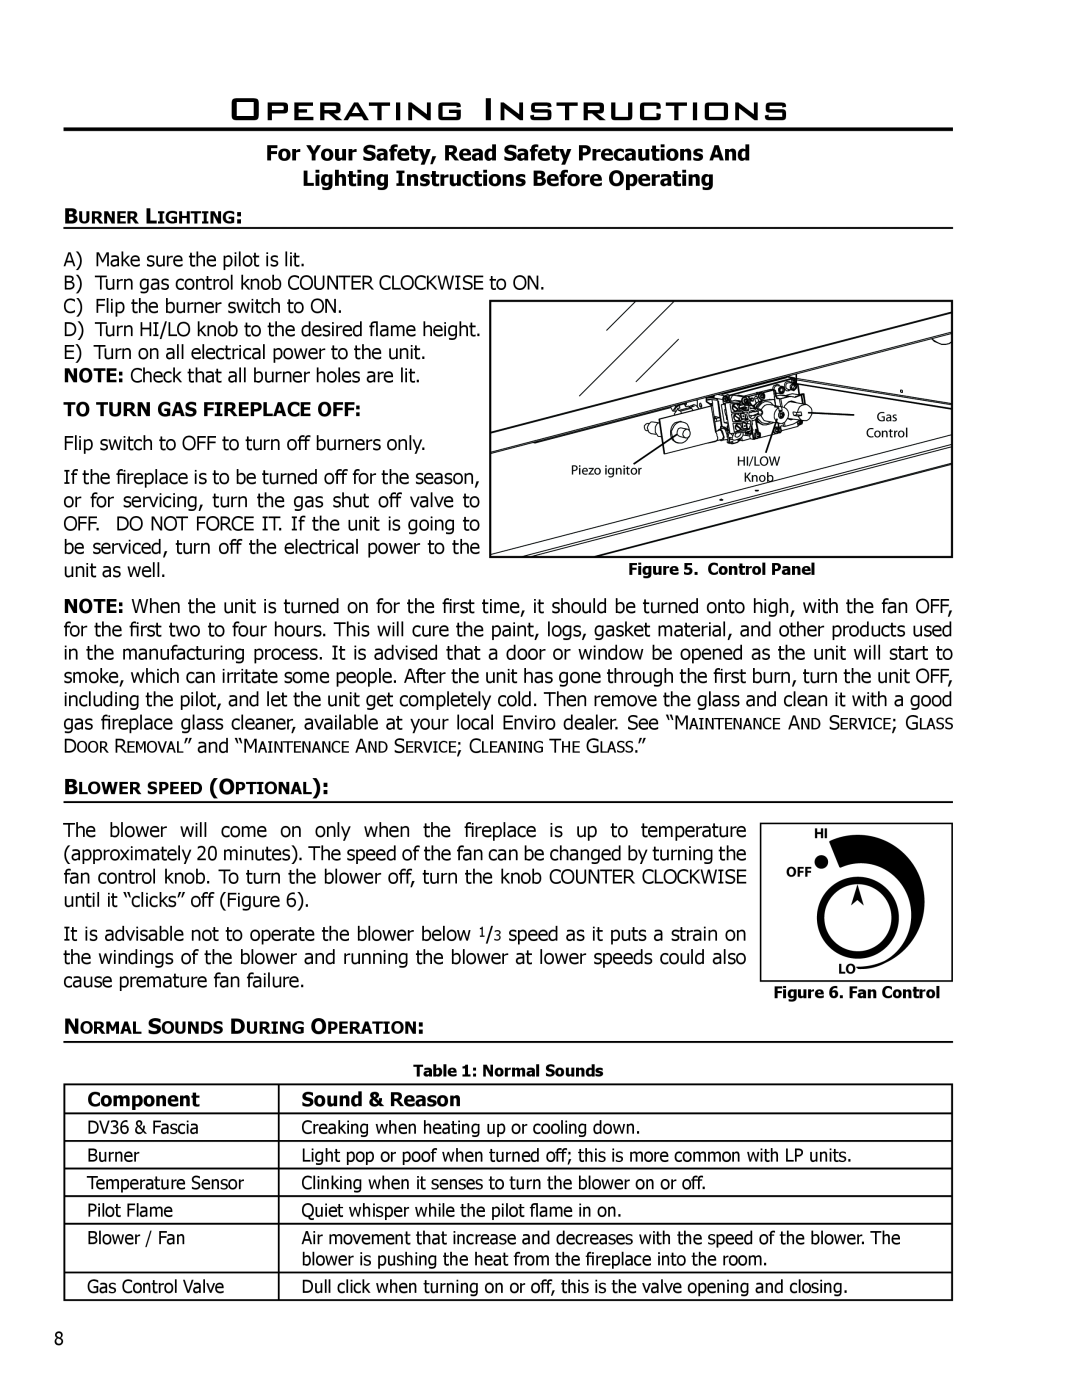 Enviro C-11275 owner manual To Turn Gas Fireplace Off, Component, Sound & Reason, Operating Instructions 